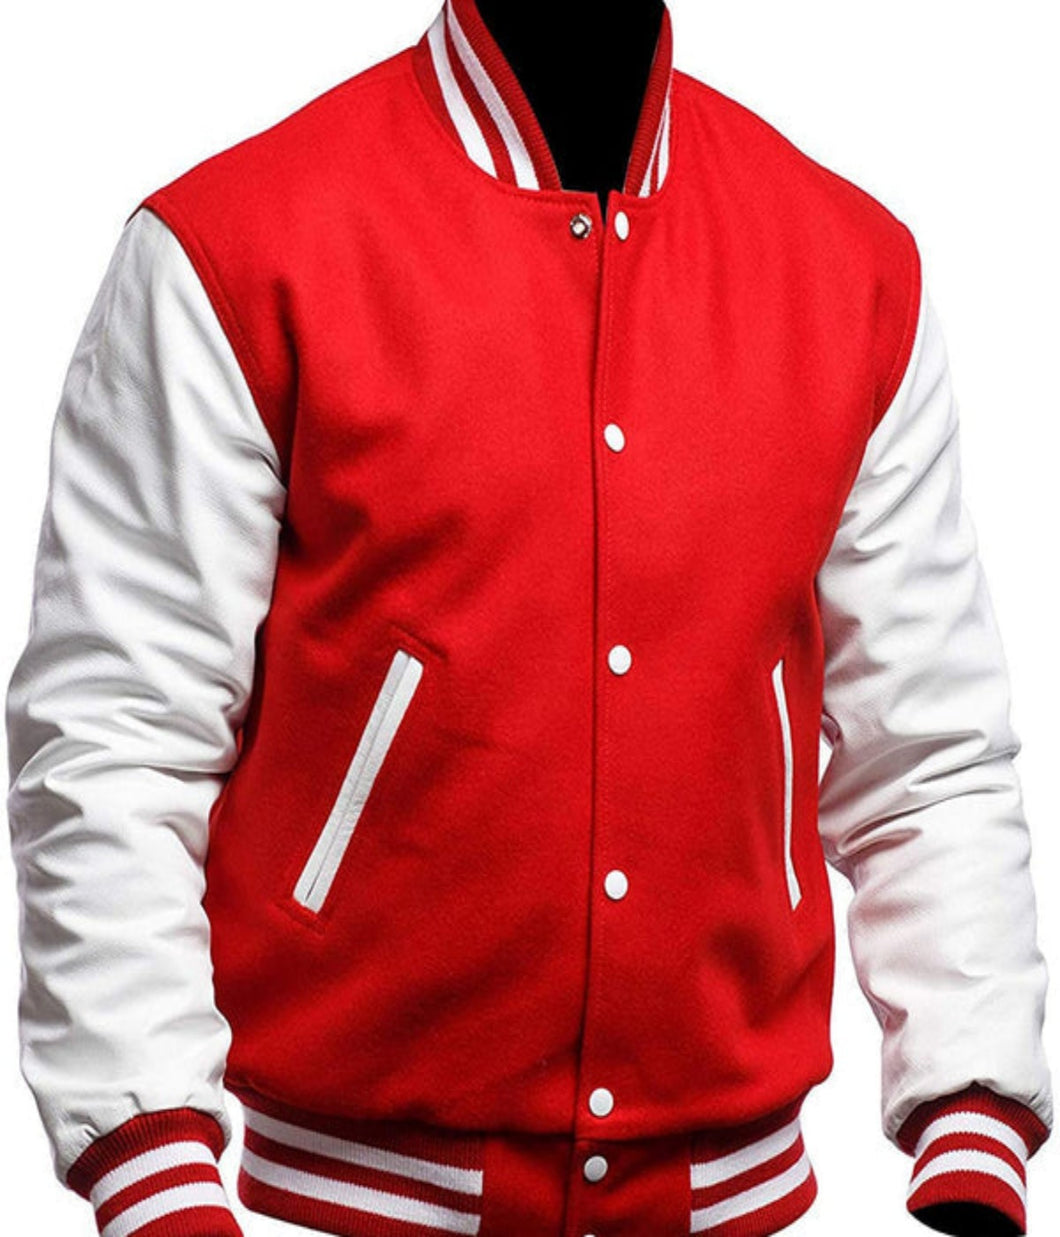 Men's Casual High Quality Red Varsity Jacket